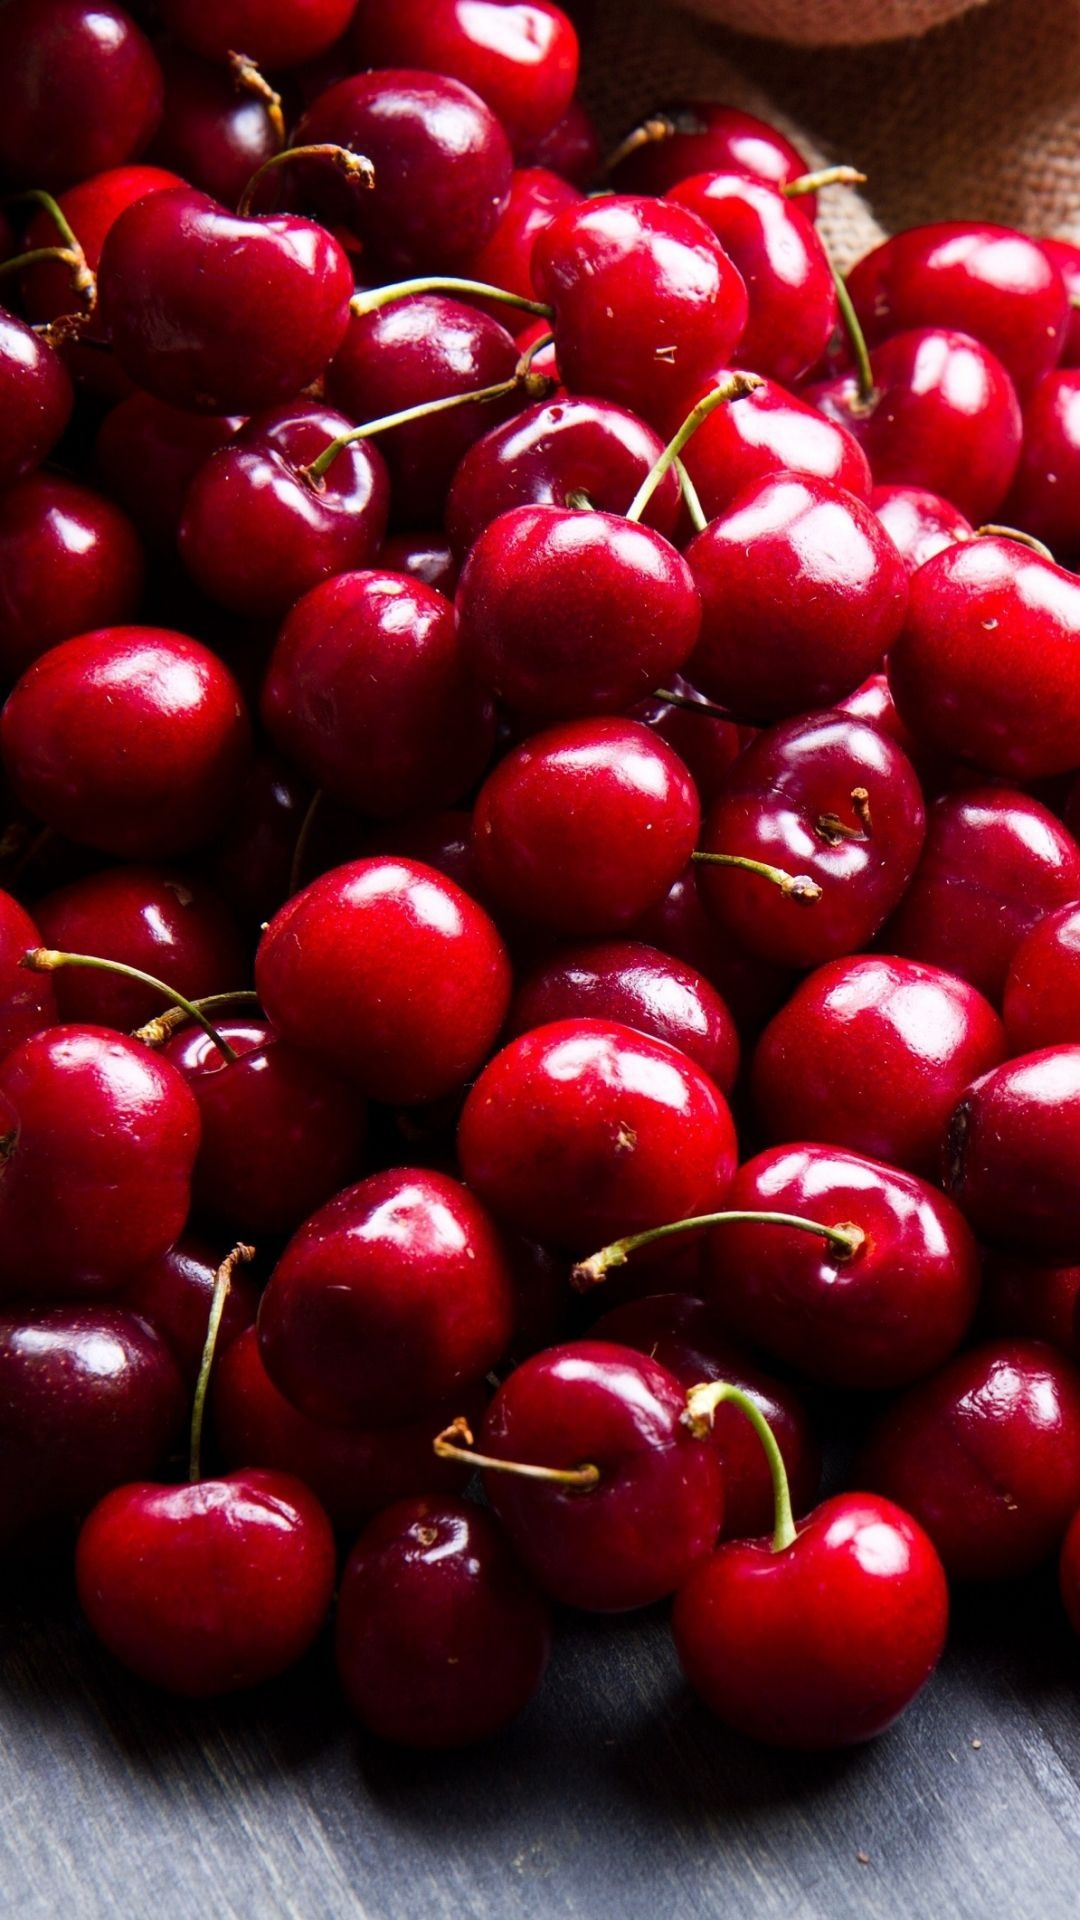 Cherry: A good source of vitamin A, which helps improve oxygen circulation in the blood. 1080x1920 Full HD Wallpaper.